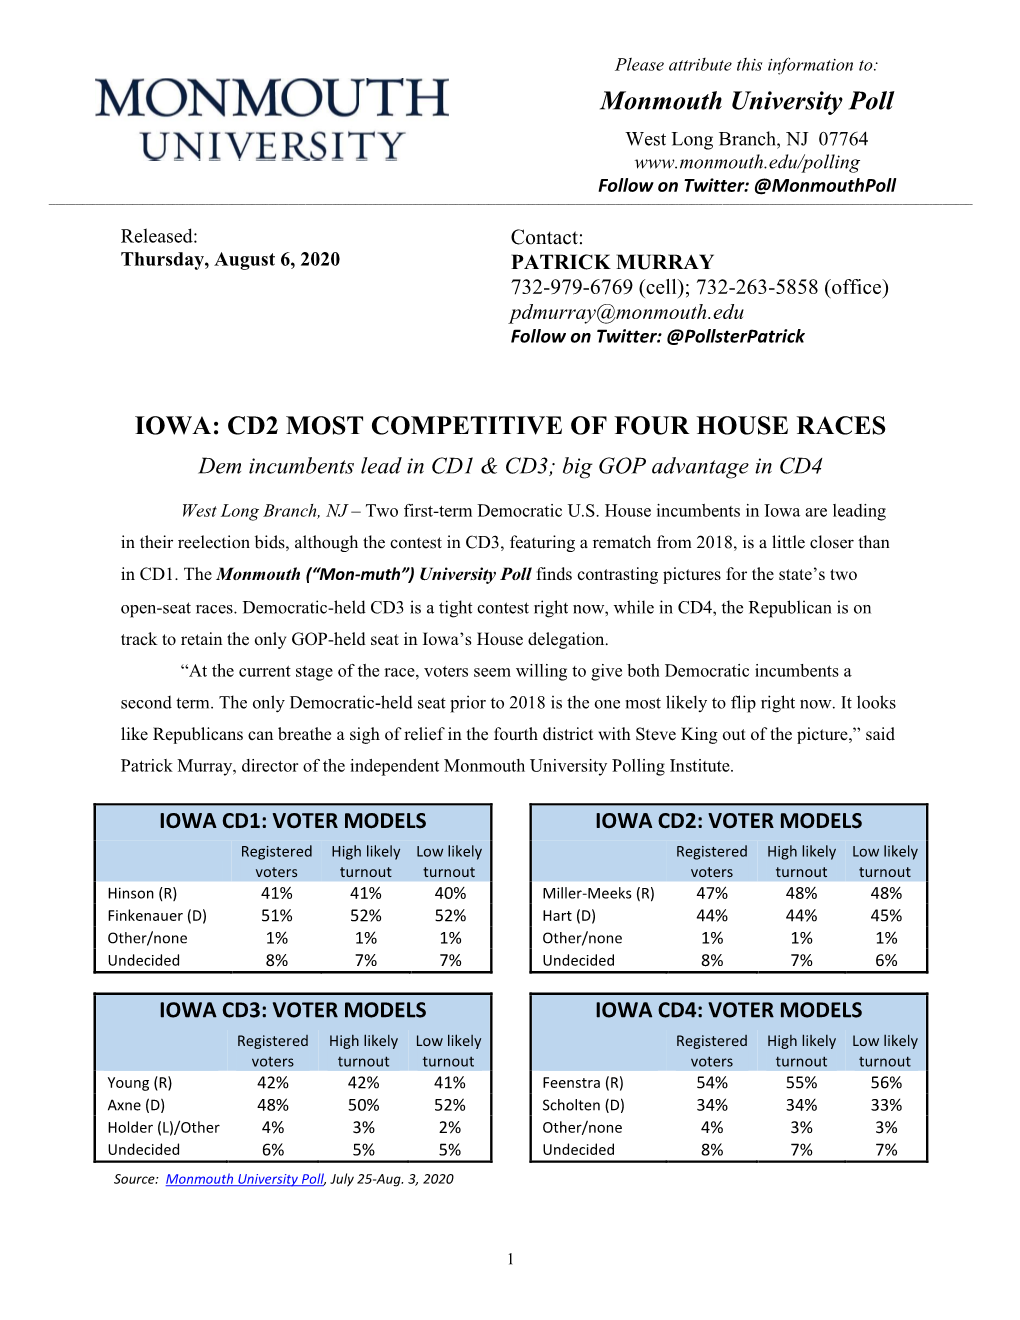 Monmouth University Poll IOWA: CD2 MOST COMPETITIVE of FOUR HOUSE RACES